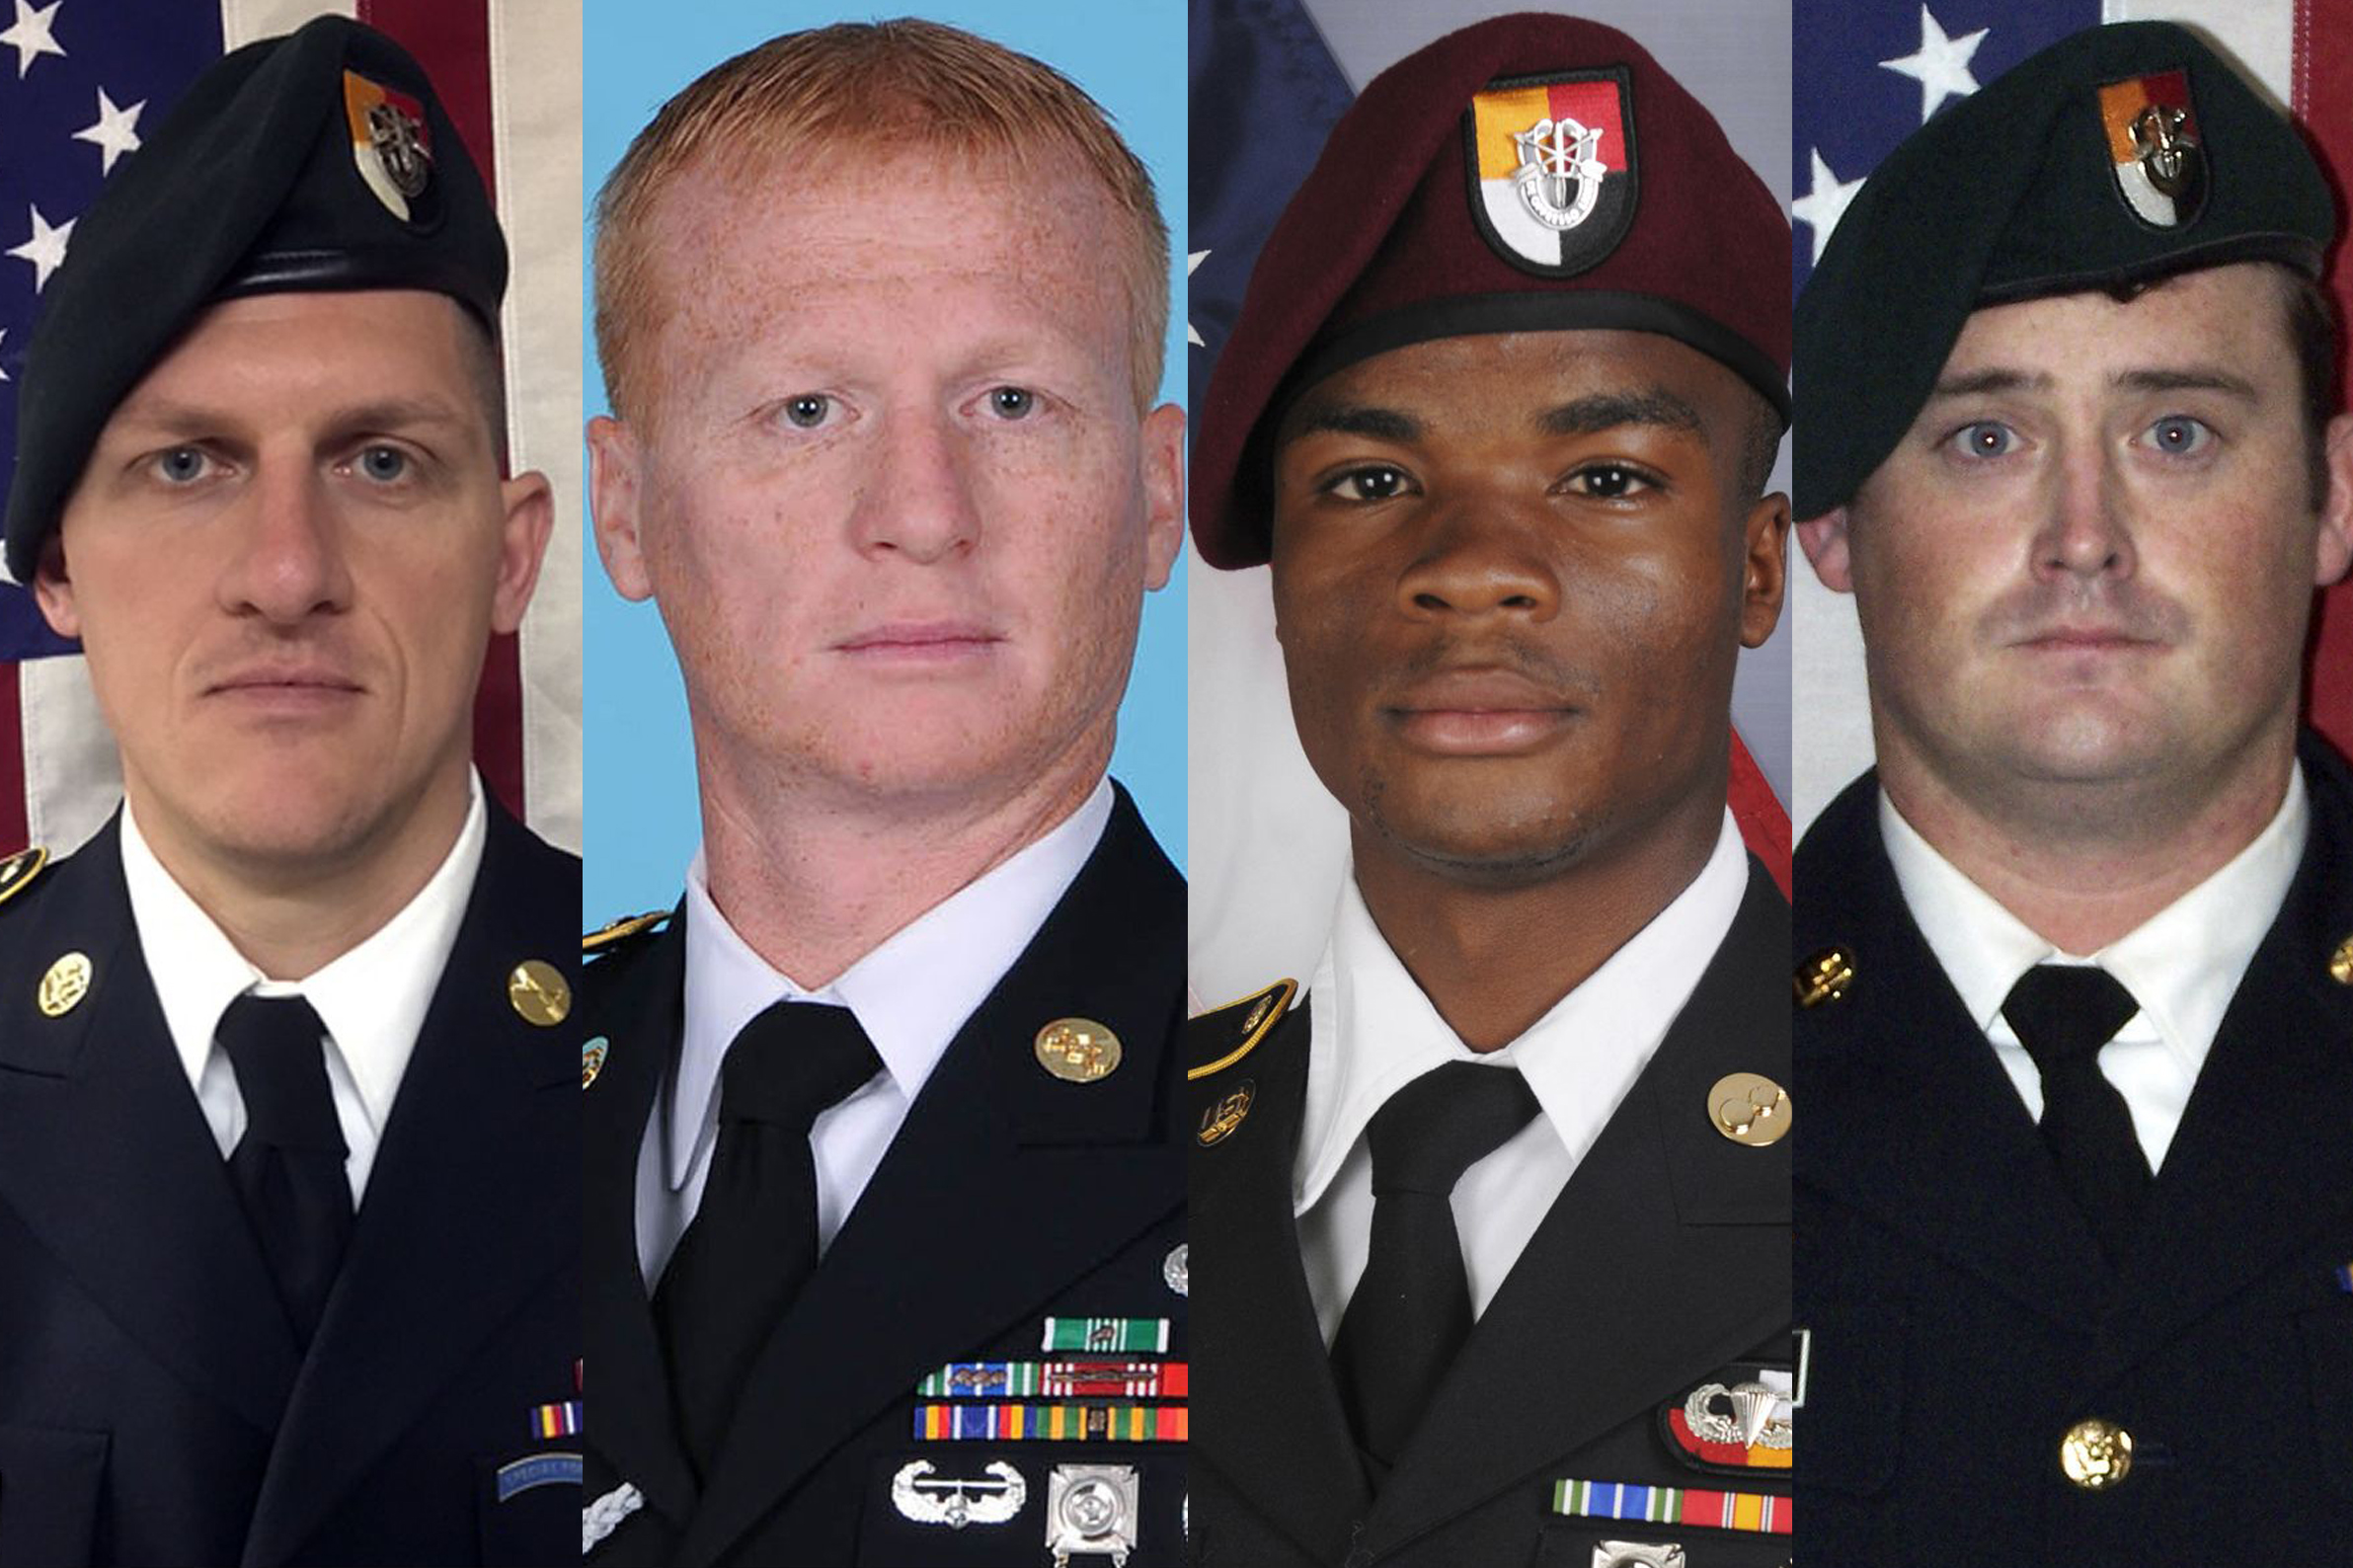 These images provided by the U.S. Army show, from left, Staff Sgt. Bryan C. Black, 35, of Puyallup, Wash.; Staff Sgt. Jeremiah W. Johnson, 39, of Springboro, Ohio; Sgt. La David Johnson of Miami Gardens, Fla.; and Staff Sgt. Dustin M. Wright, 29, of Lyons, Ga. All four were killed in Niger, when a joint patrol of American and Niger forces was ambushed by militants believed linked to the Islamic State group (AP/REX/Shutterstock)